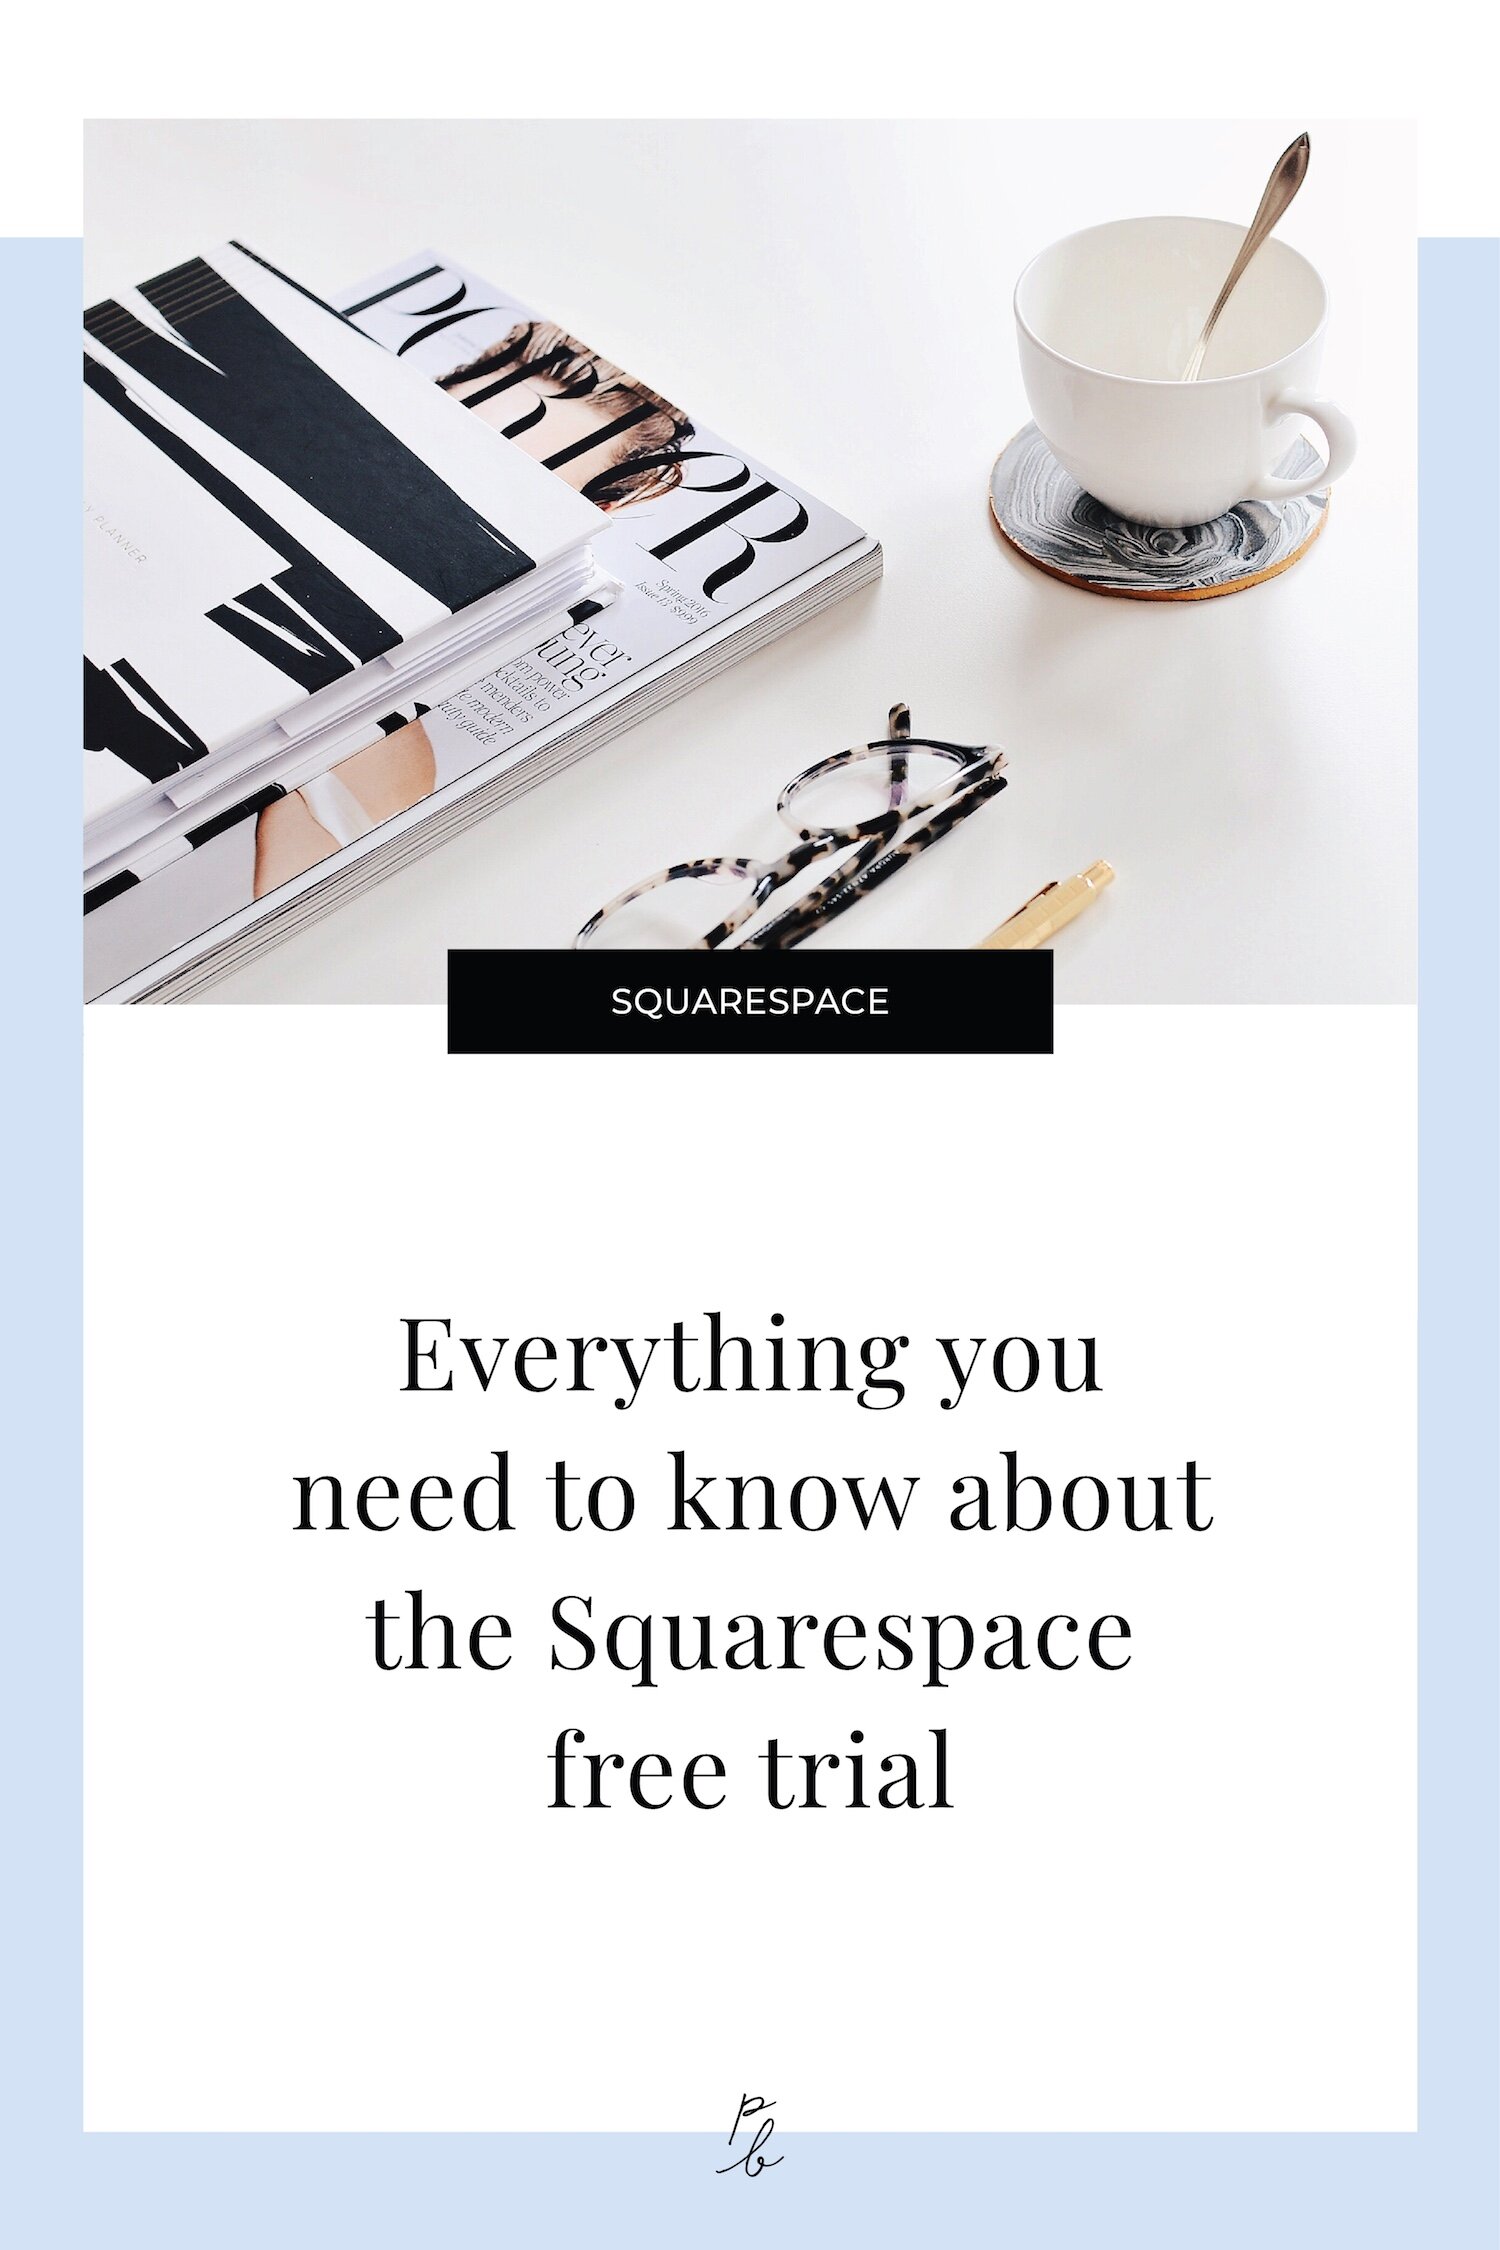 everything-you-need-to-know-about-the-squarespace-free-trial-paige